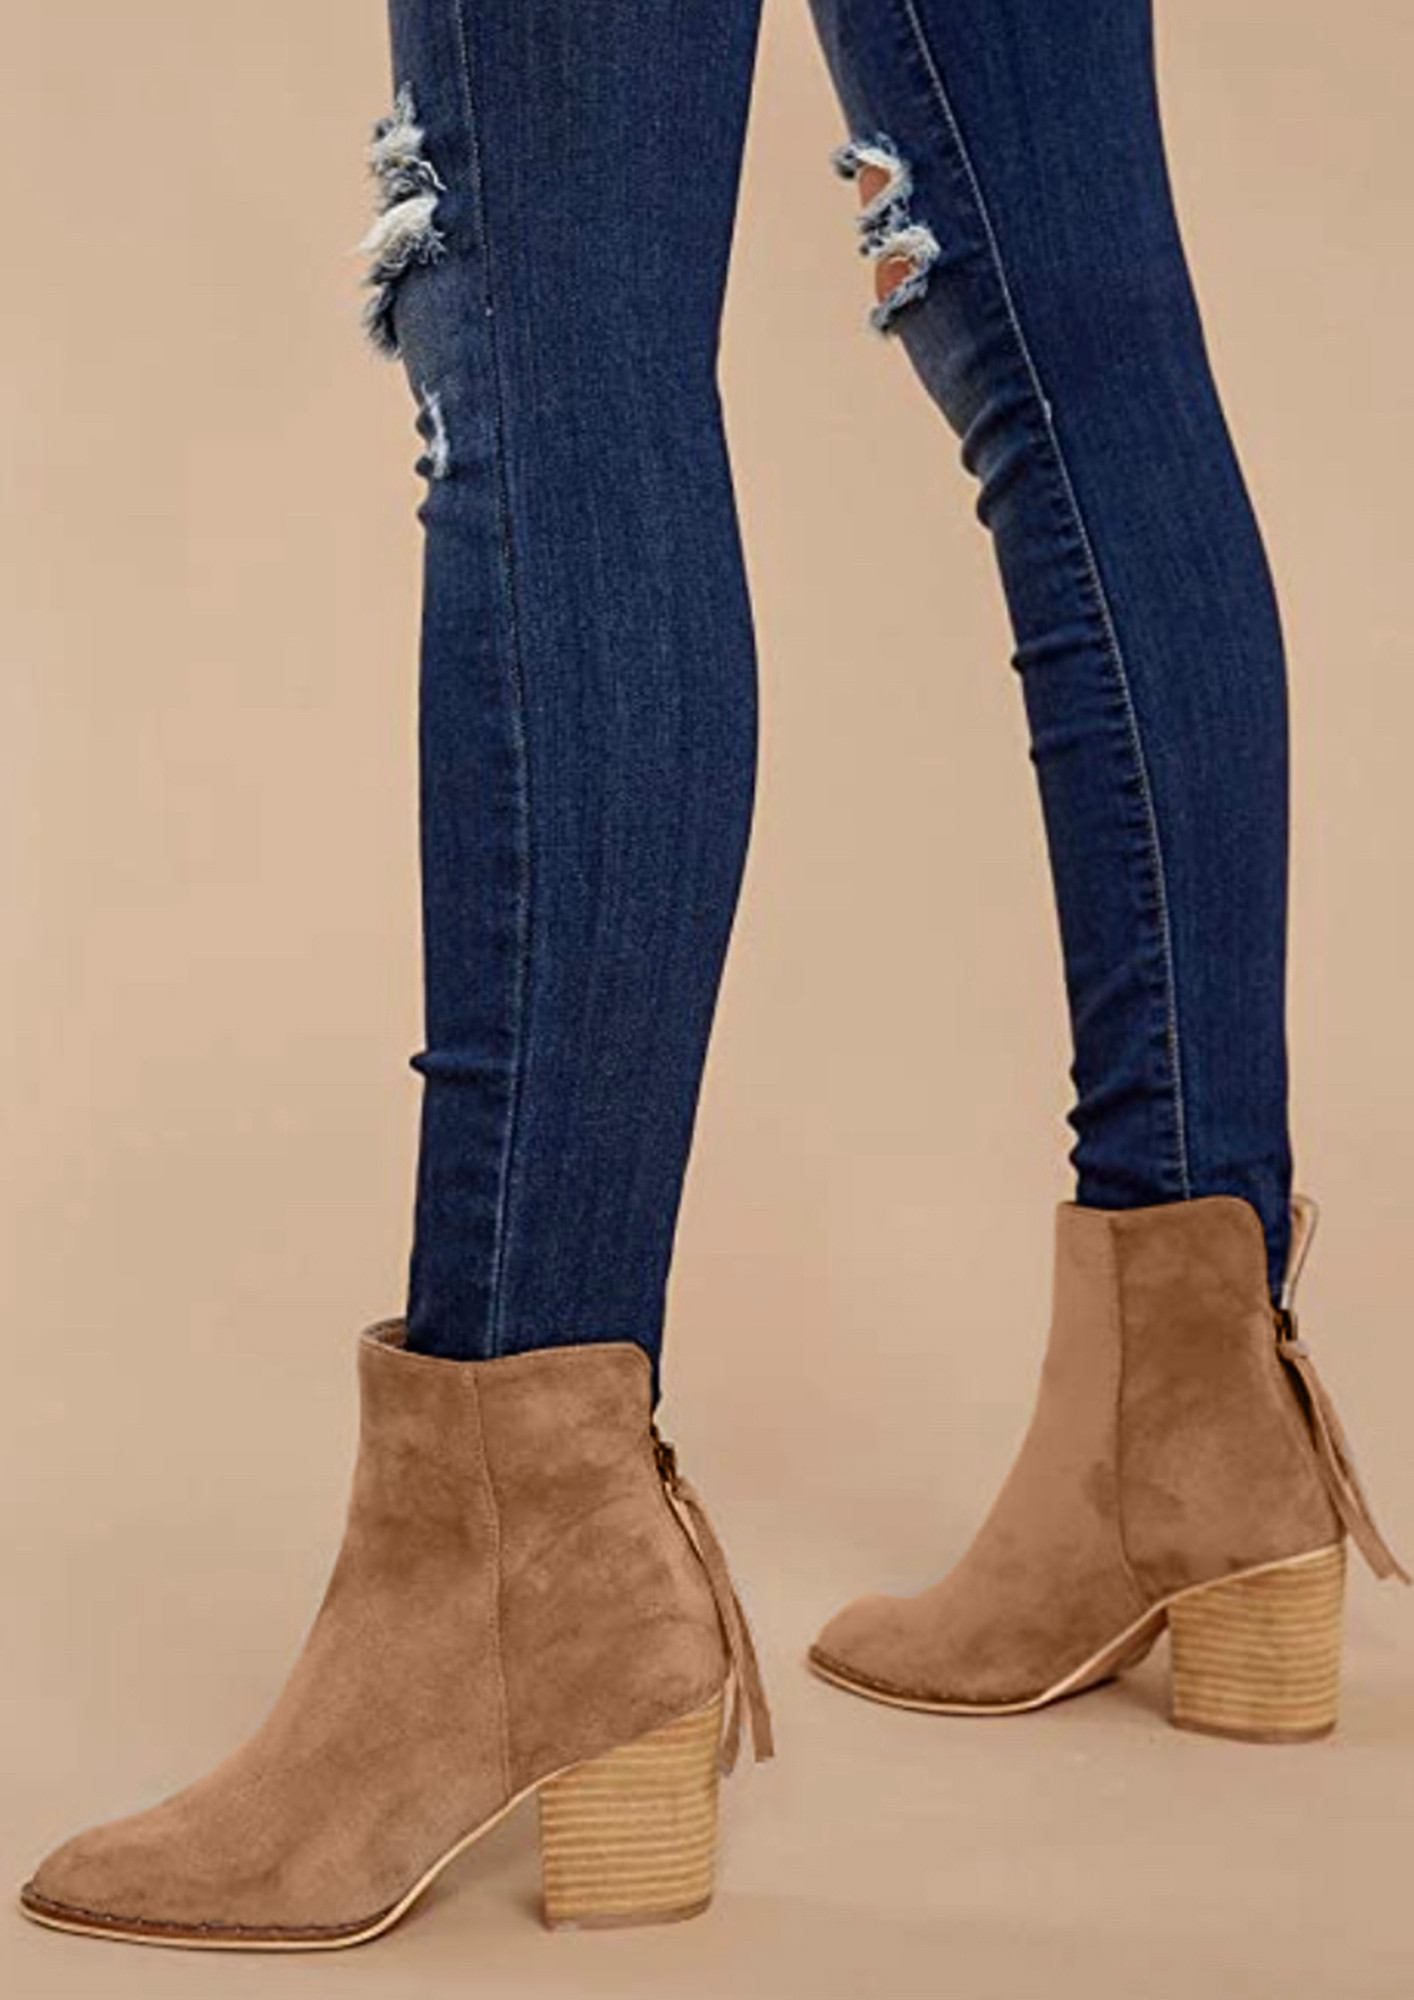 STYLISH LOW HEEL BROWN SUEDE ANKLE BOOTS